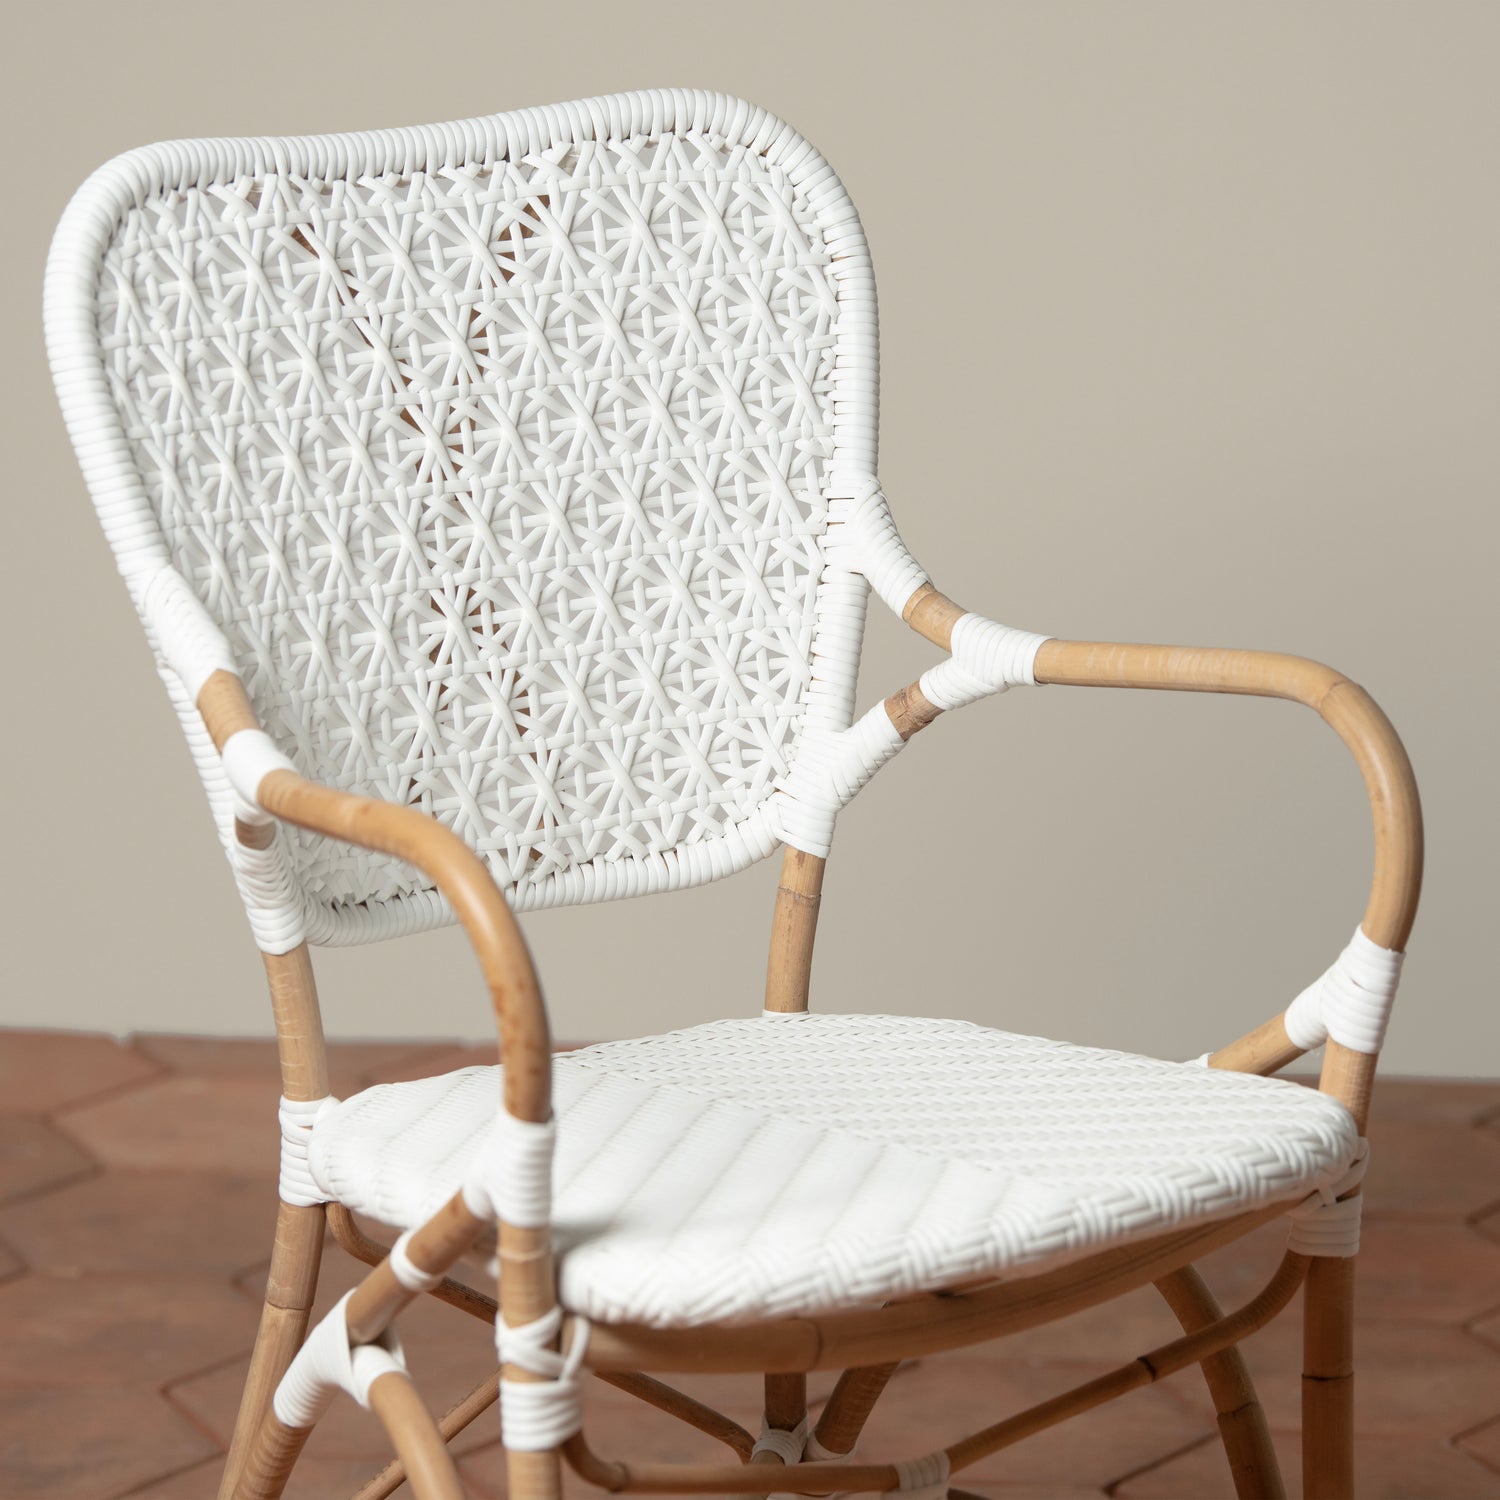 A close up of the neutral background is a white and tan woven rattan chair with woven cane on the backrest and seat.